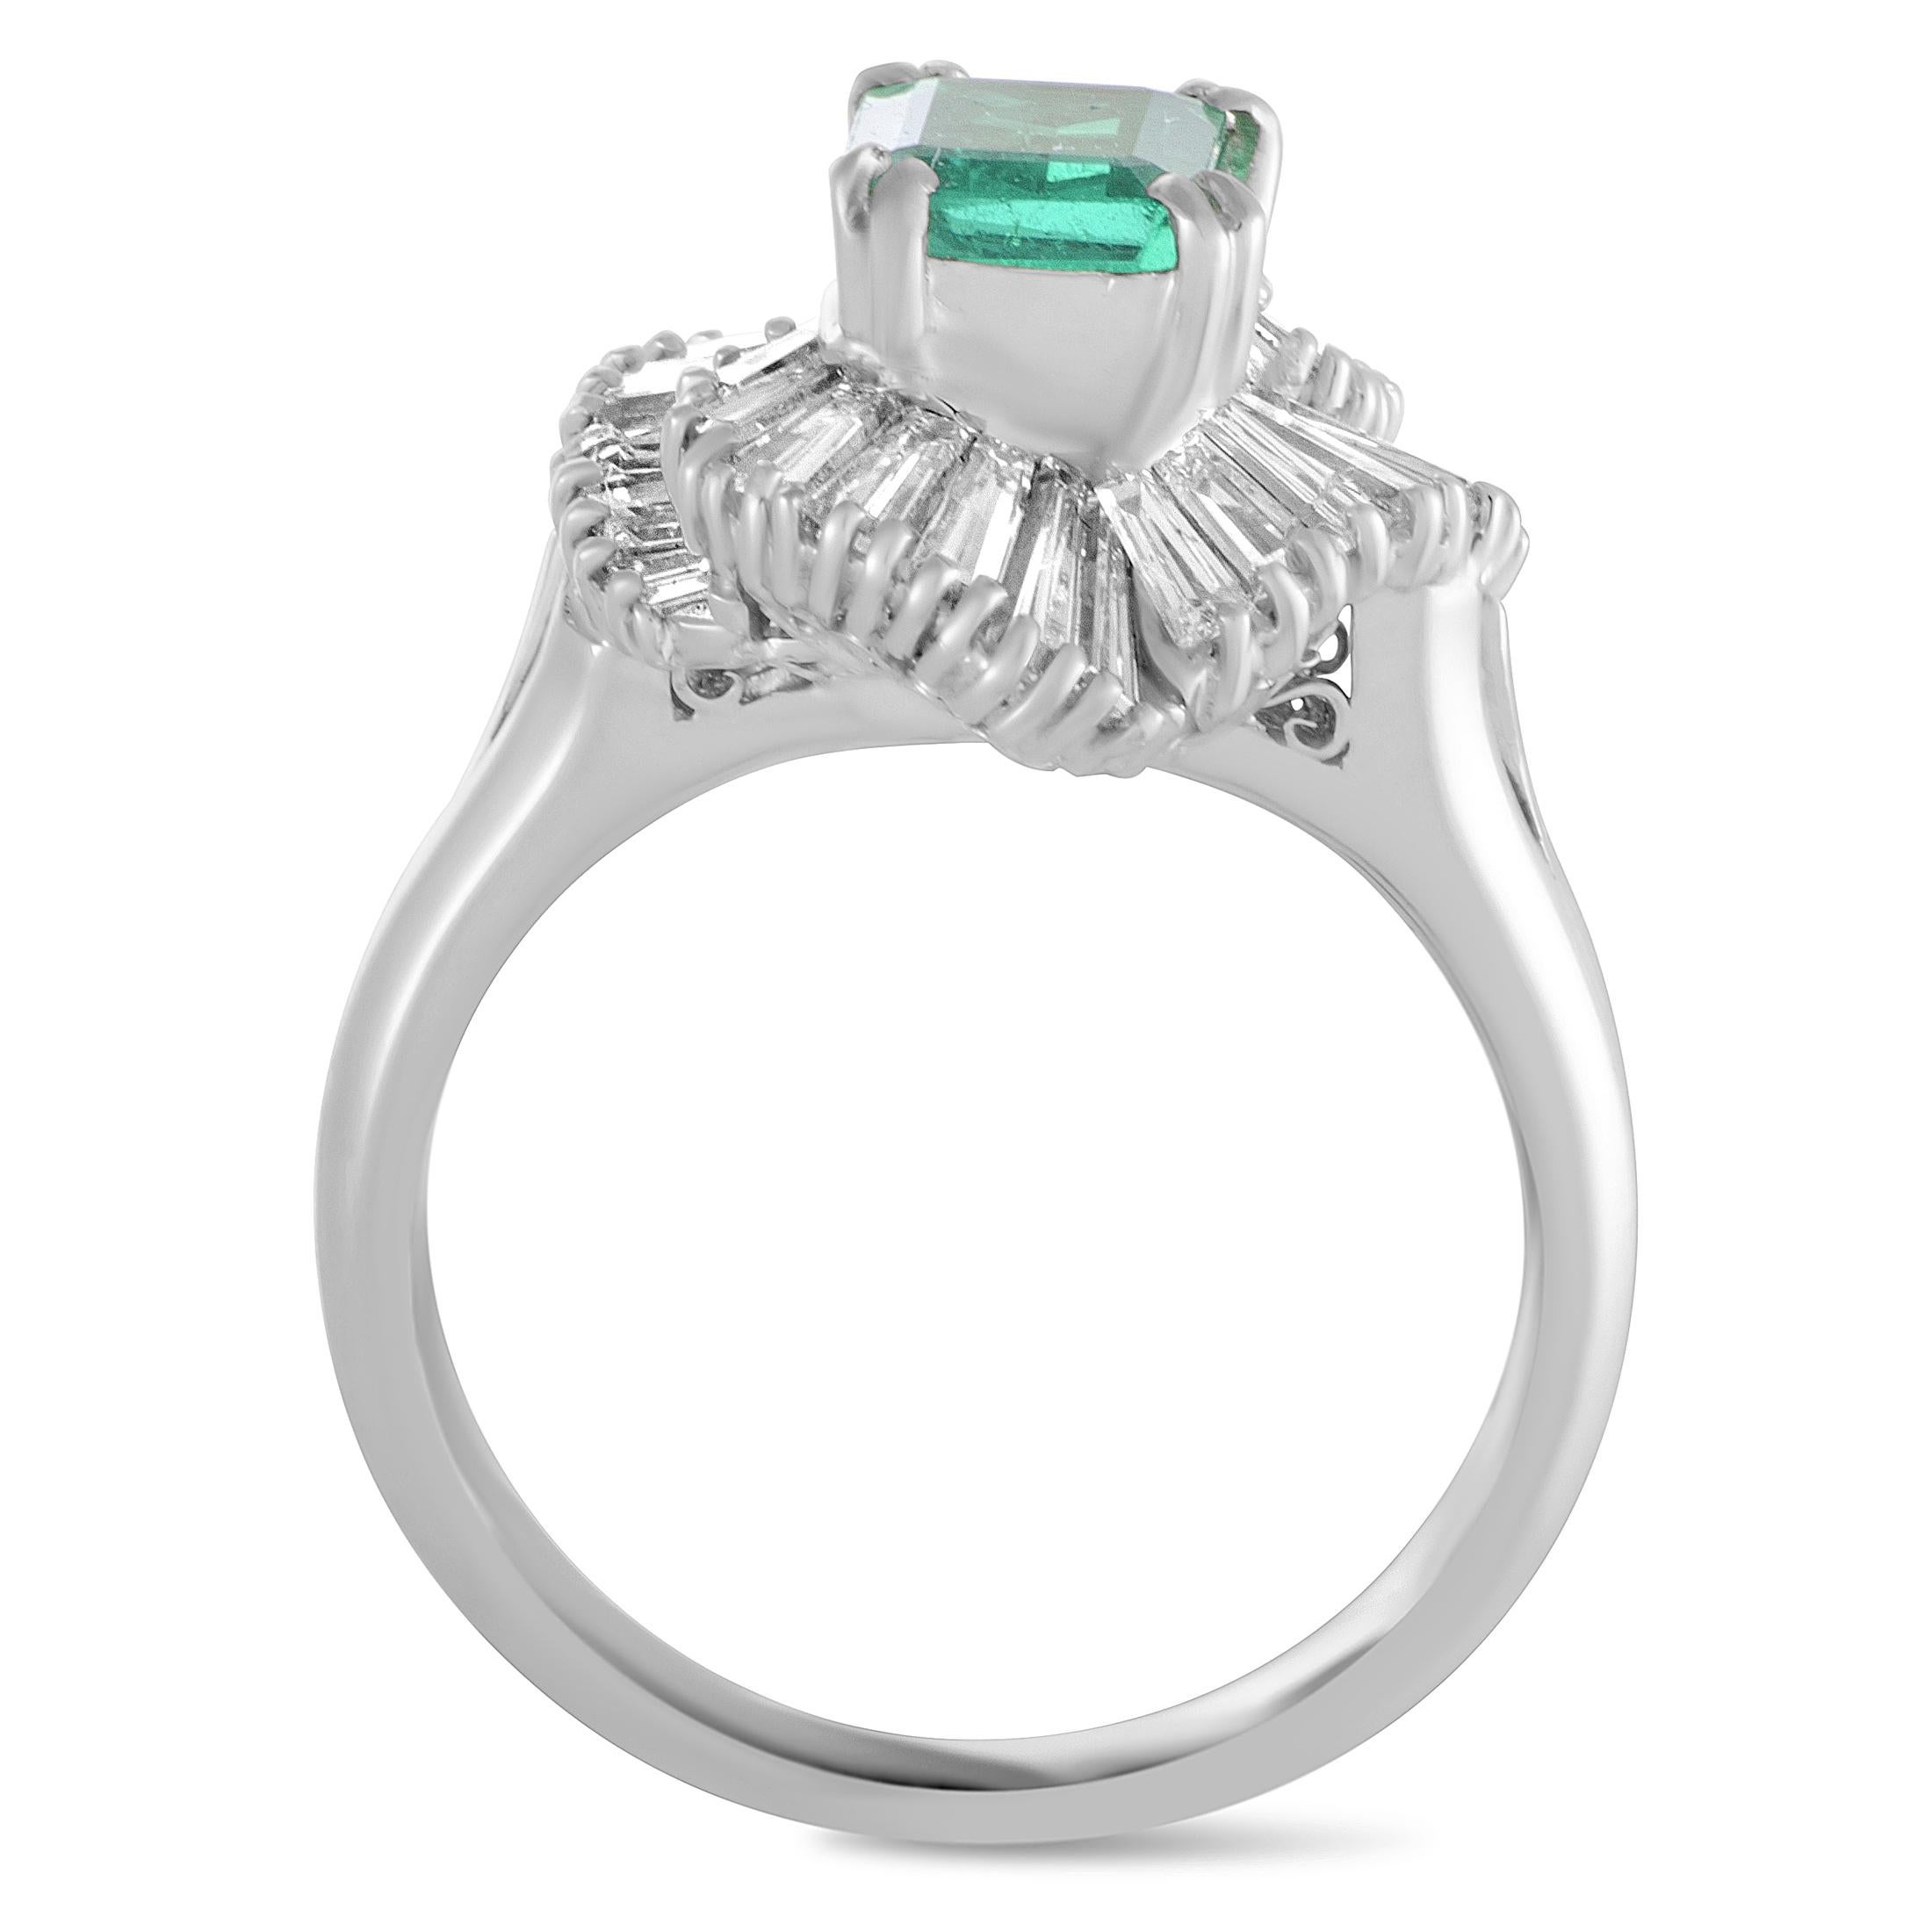 Elevate your style in a compellingly luxurious manner with this fabulous ring that is exquisitely crafted from prestigious platinum and splendidly embellished with an emerald and a plethora of incredibly resplendent diamonds. The emerald weighs 0.94